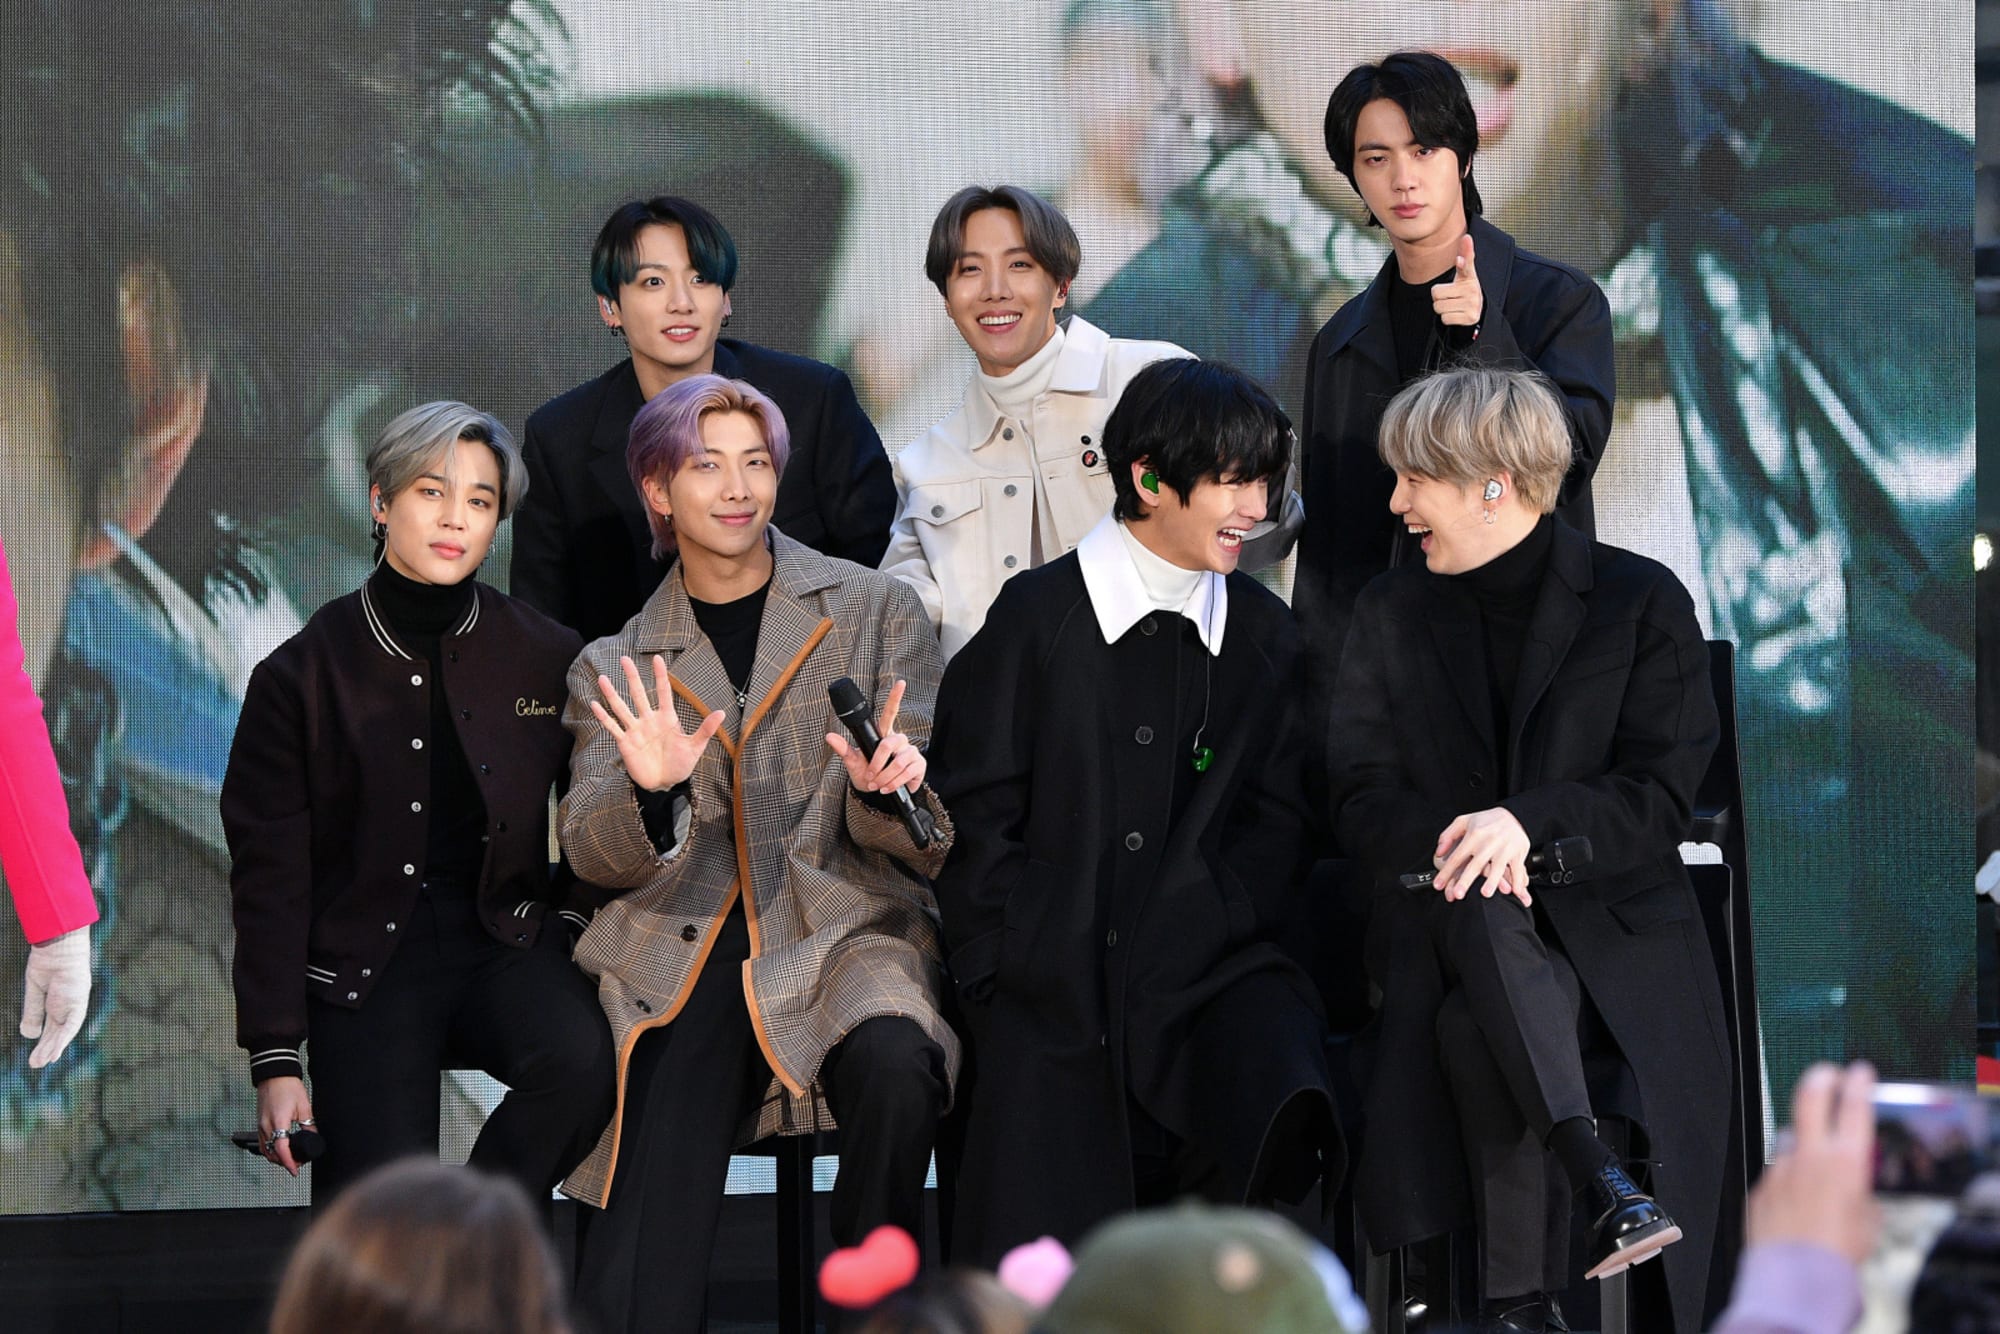 BTS shut out of 2020 Grammys, fans say global impact goes beyond